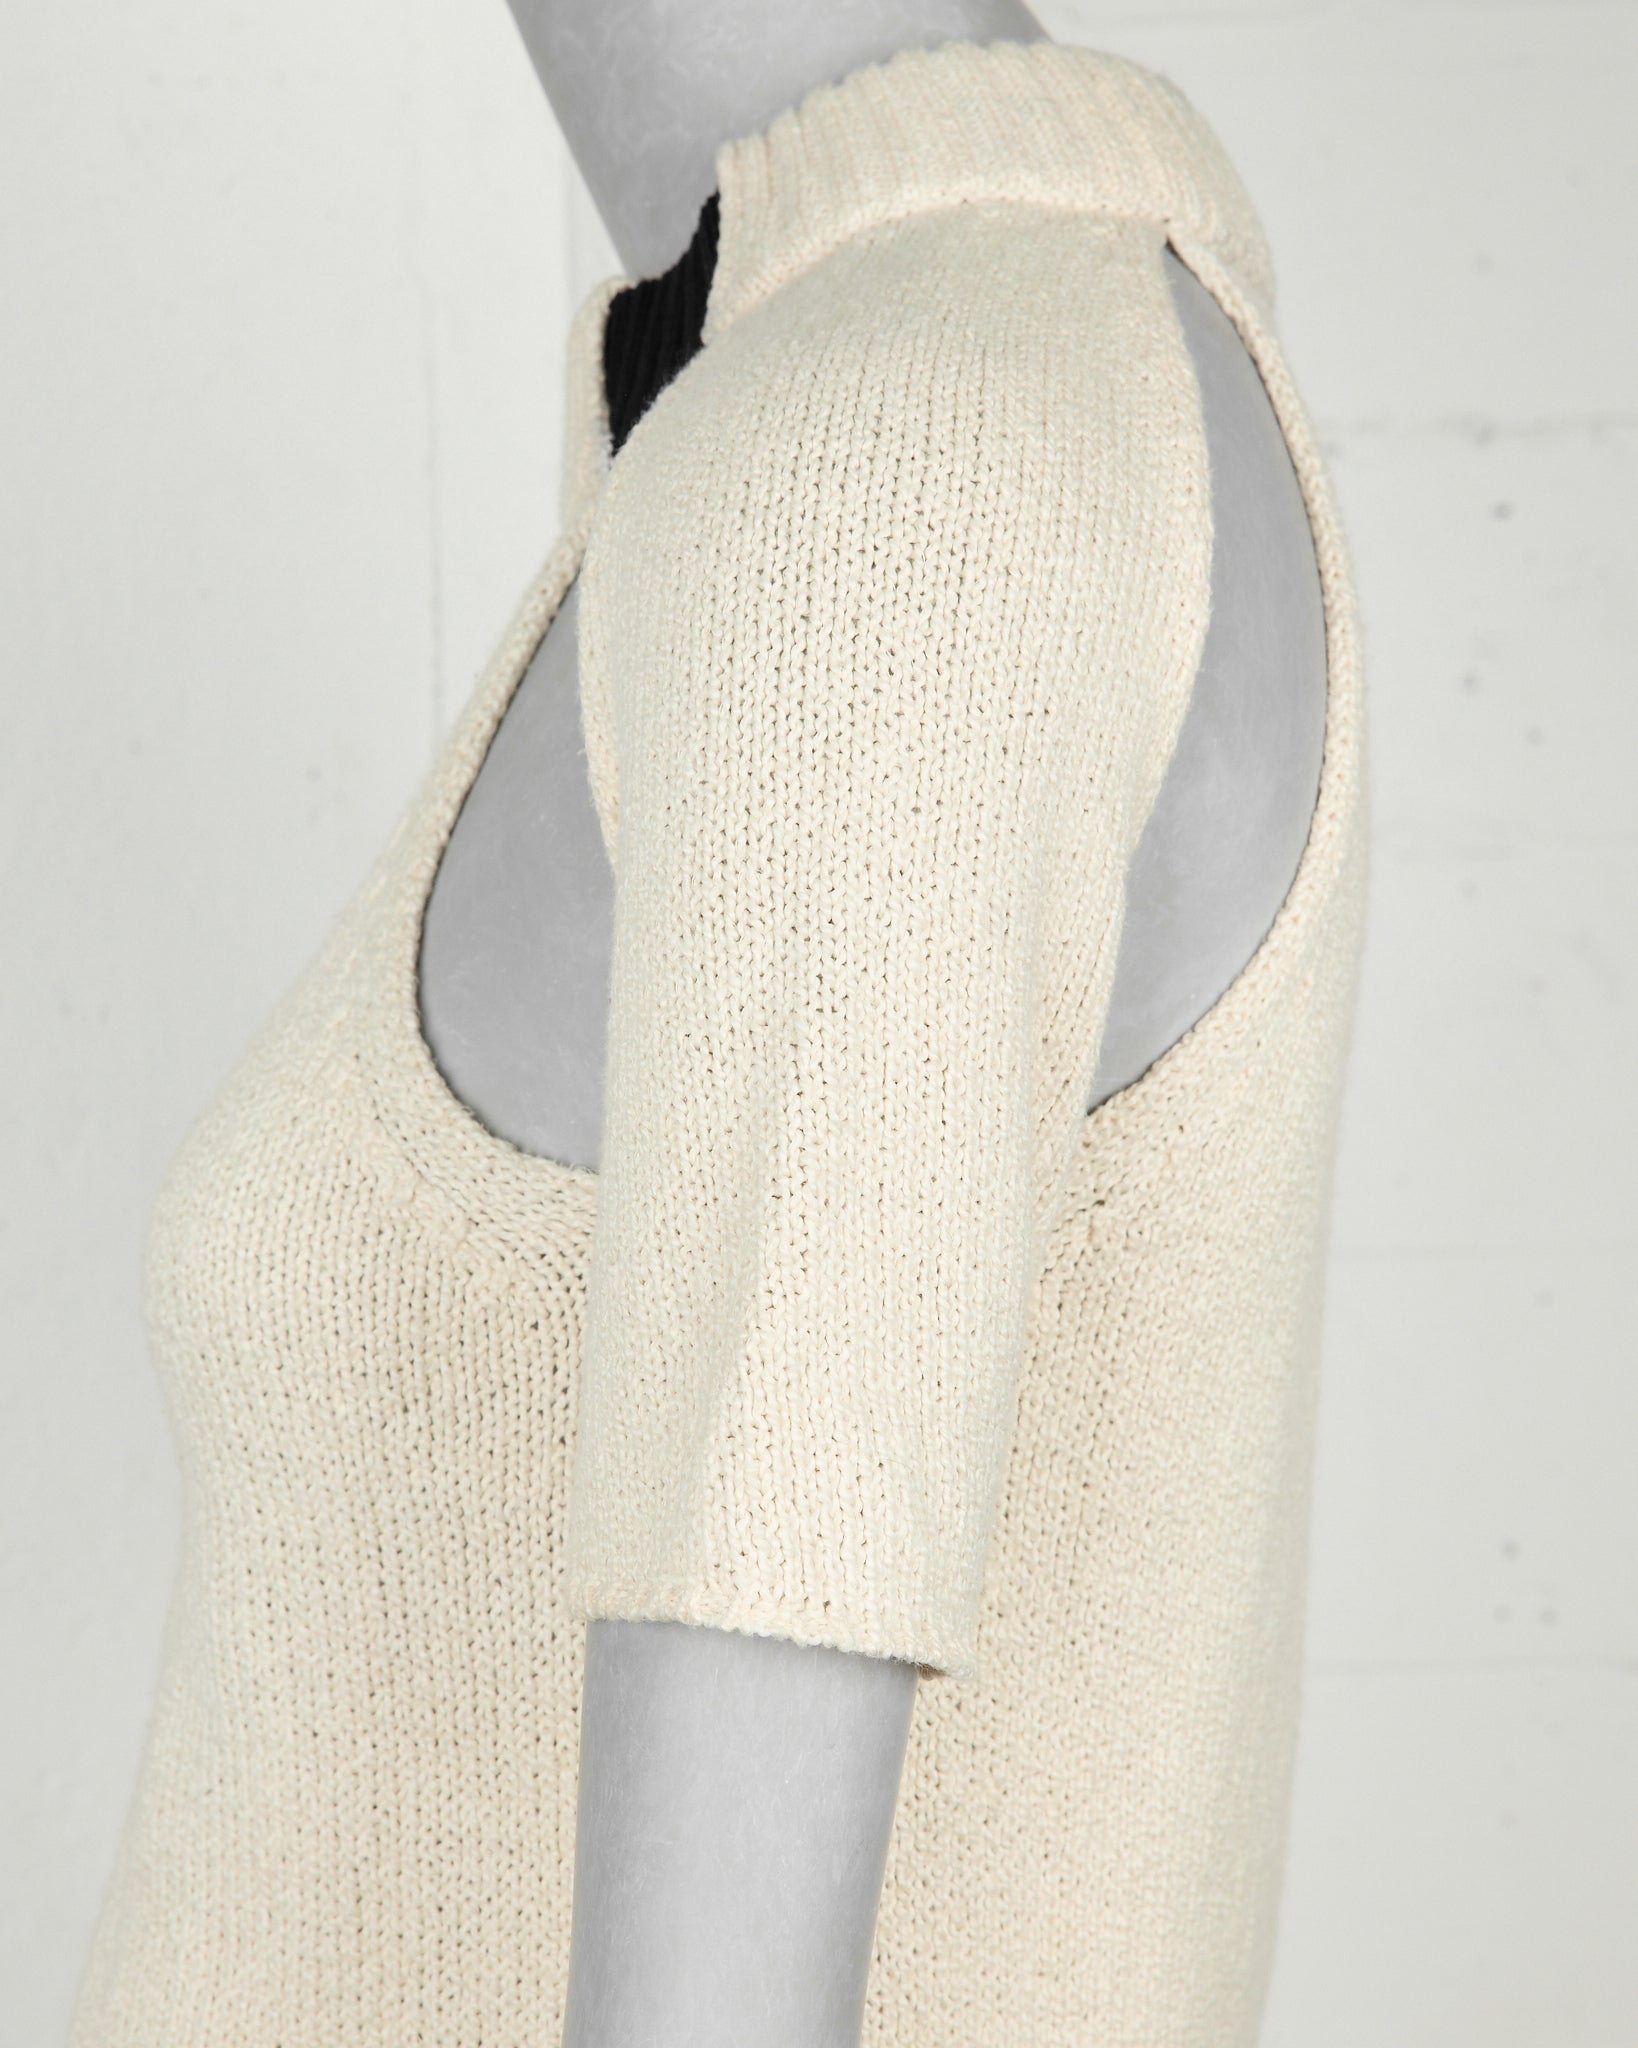 Celine by Phoebe Philo Cut-Out Short Sleeve Knitted Top detail photo